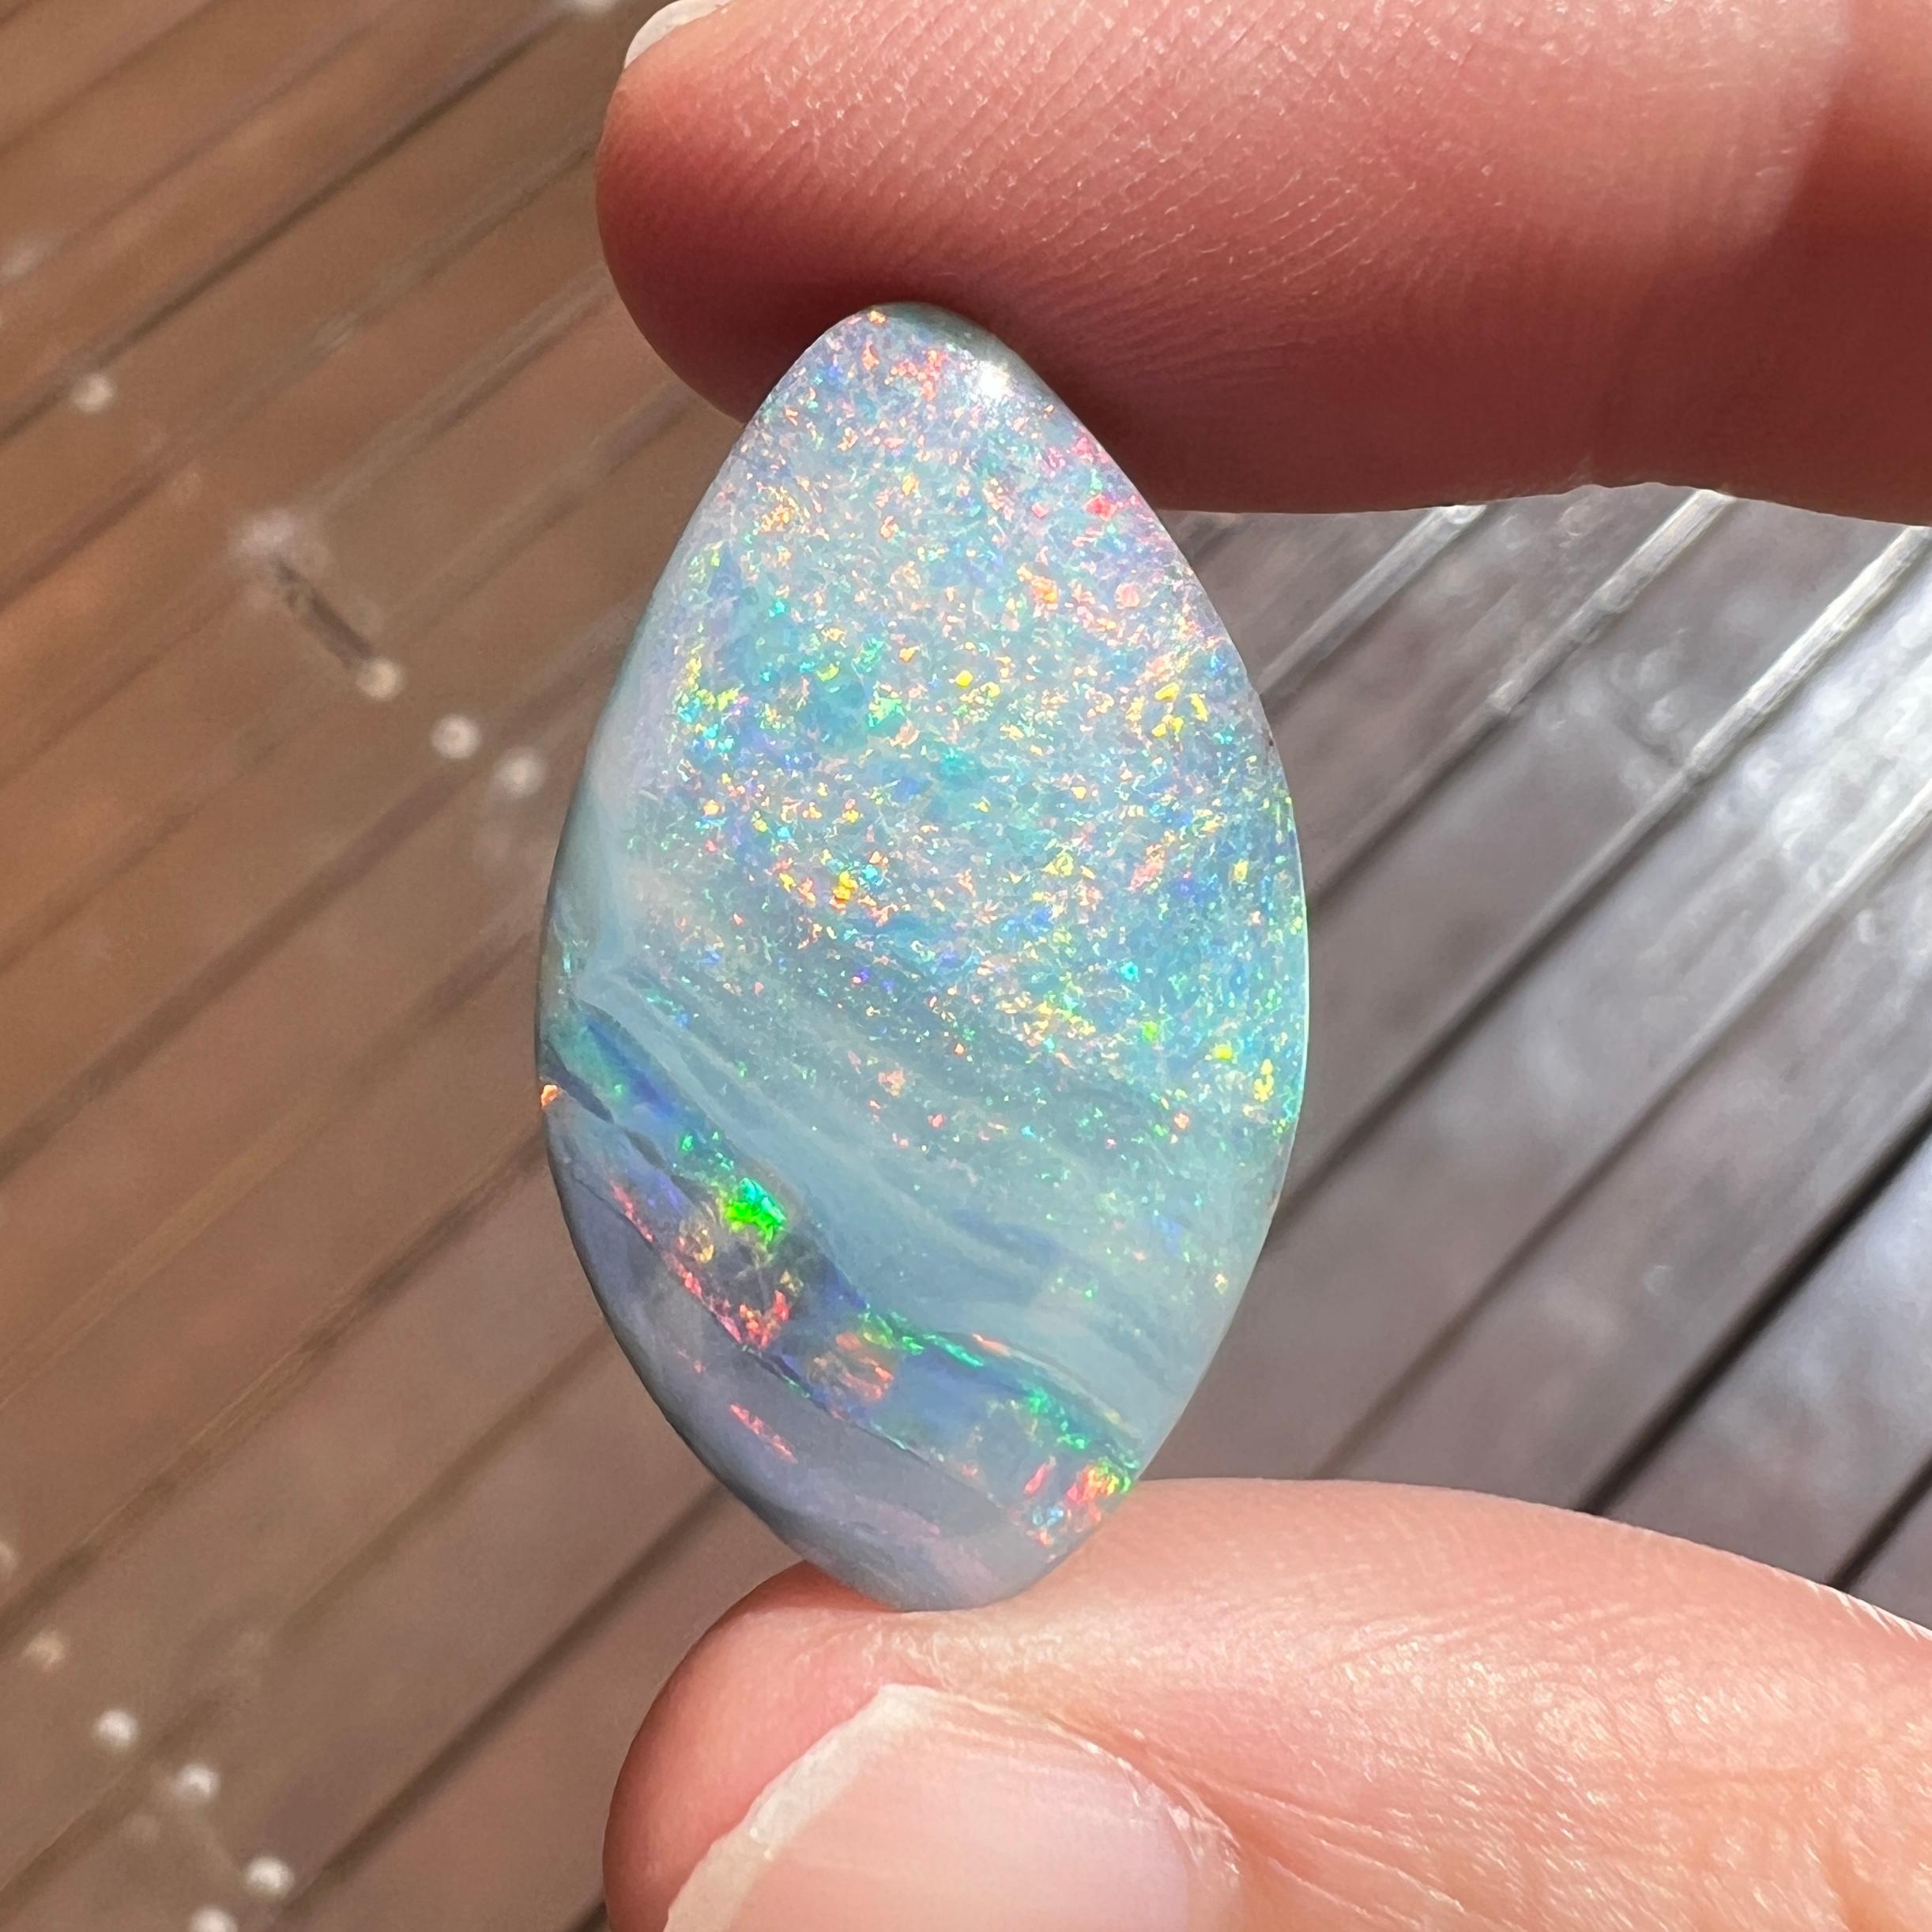 This beautiful 20.94 Ct Australian boulder opal was mined by Sue Cooper at her Russells opal mine in western Queensland, Australia in 2020. Sue processed the rough opal herself and cut into into a lovely balanced shape. 
We love how it has two